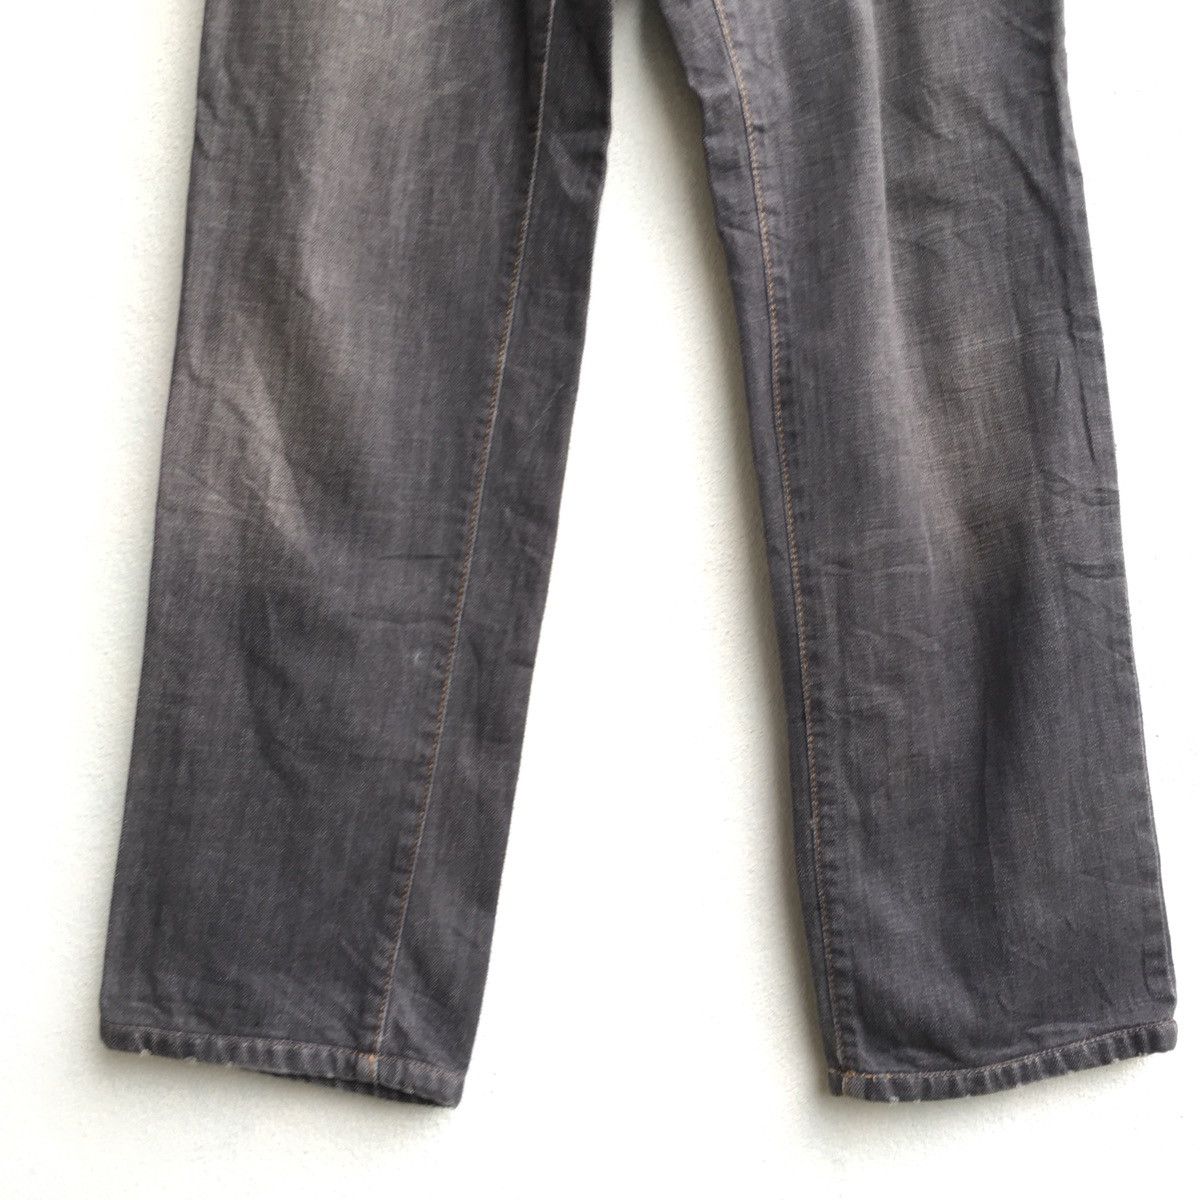 D&G FW05/06 Distressed Jeans - 3